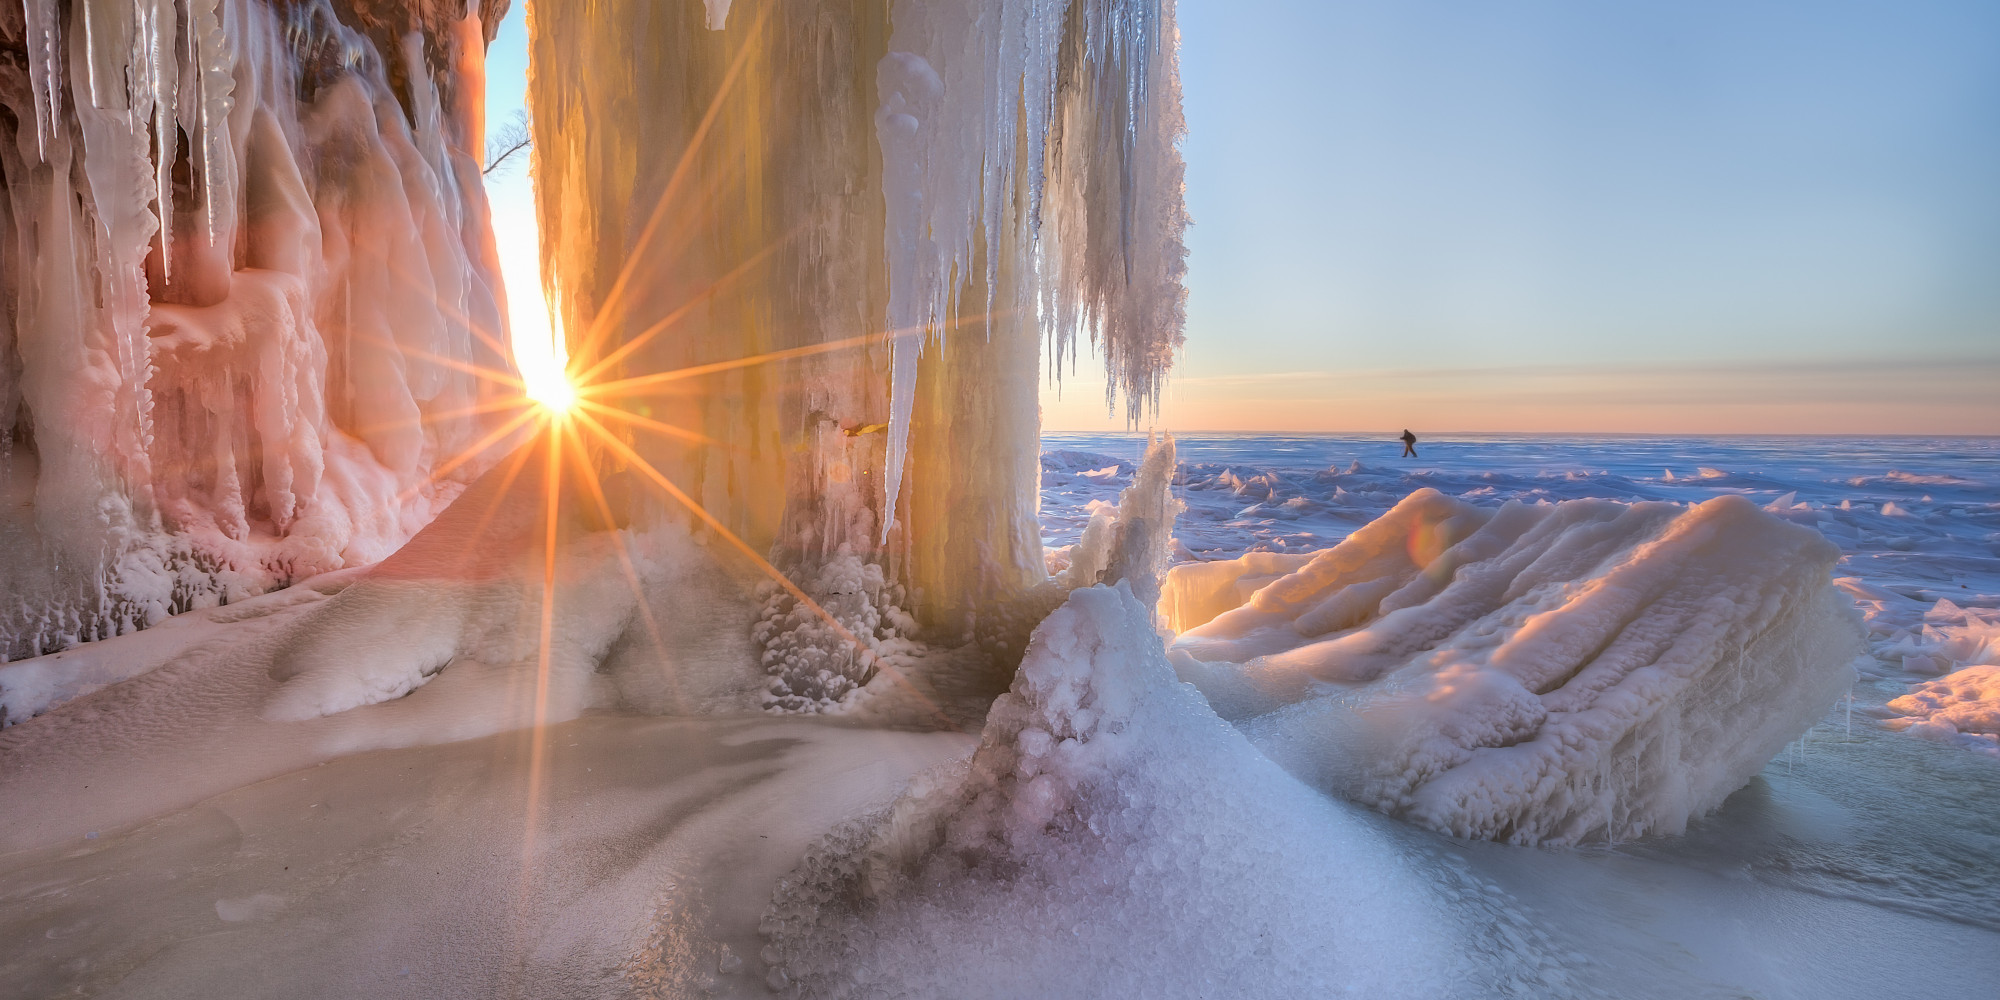 The Route To See The Apostle Islands Ice Caves Is Treacherous, But The Views Are Totally Worth It